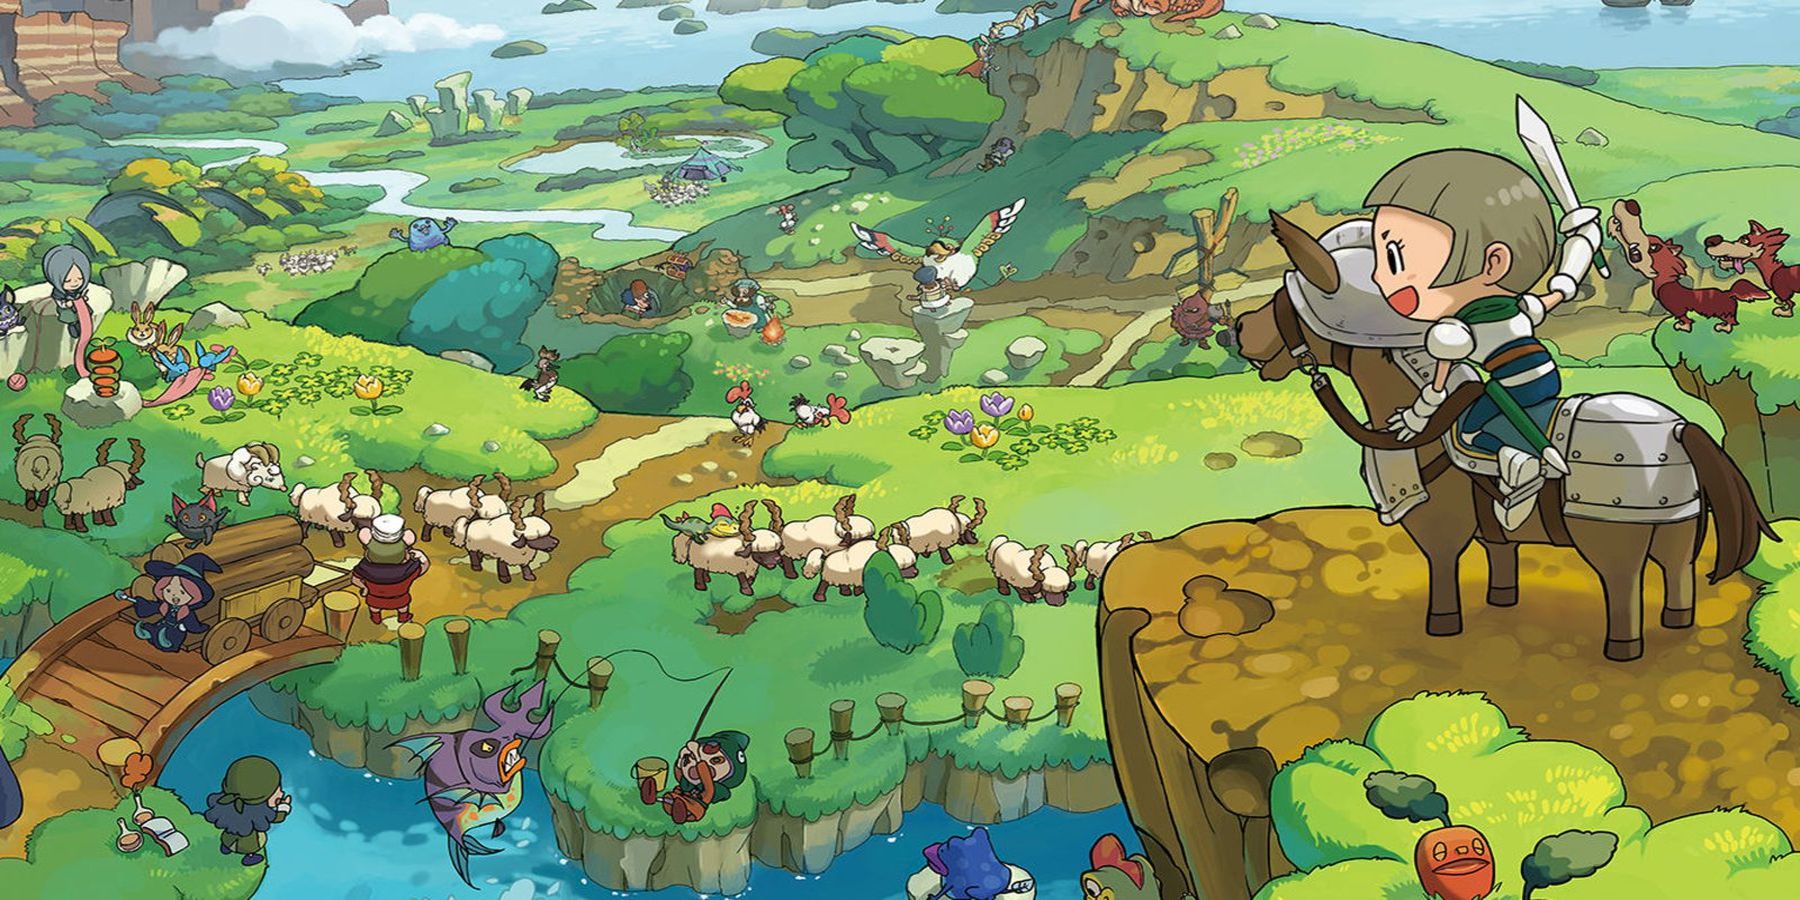 Artwork from the 3DS video game Fantasy Life.